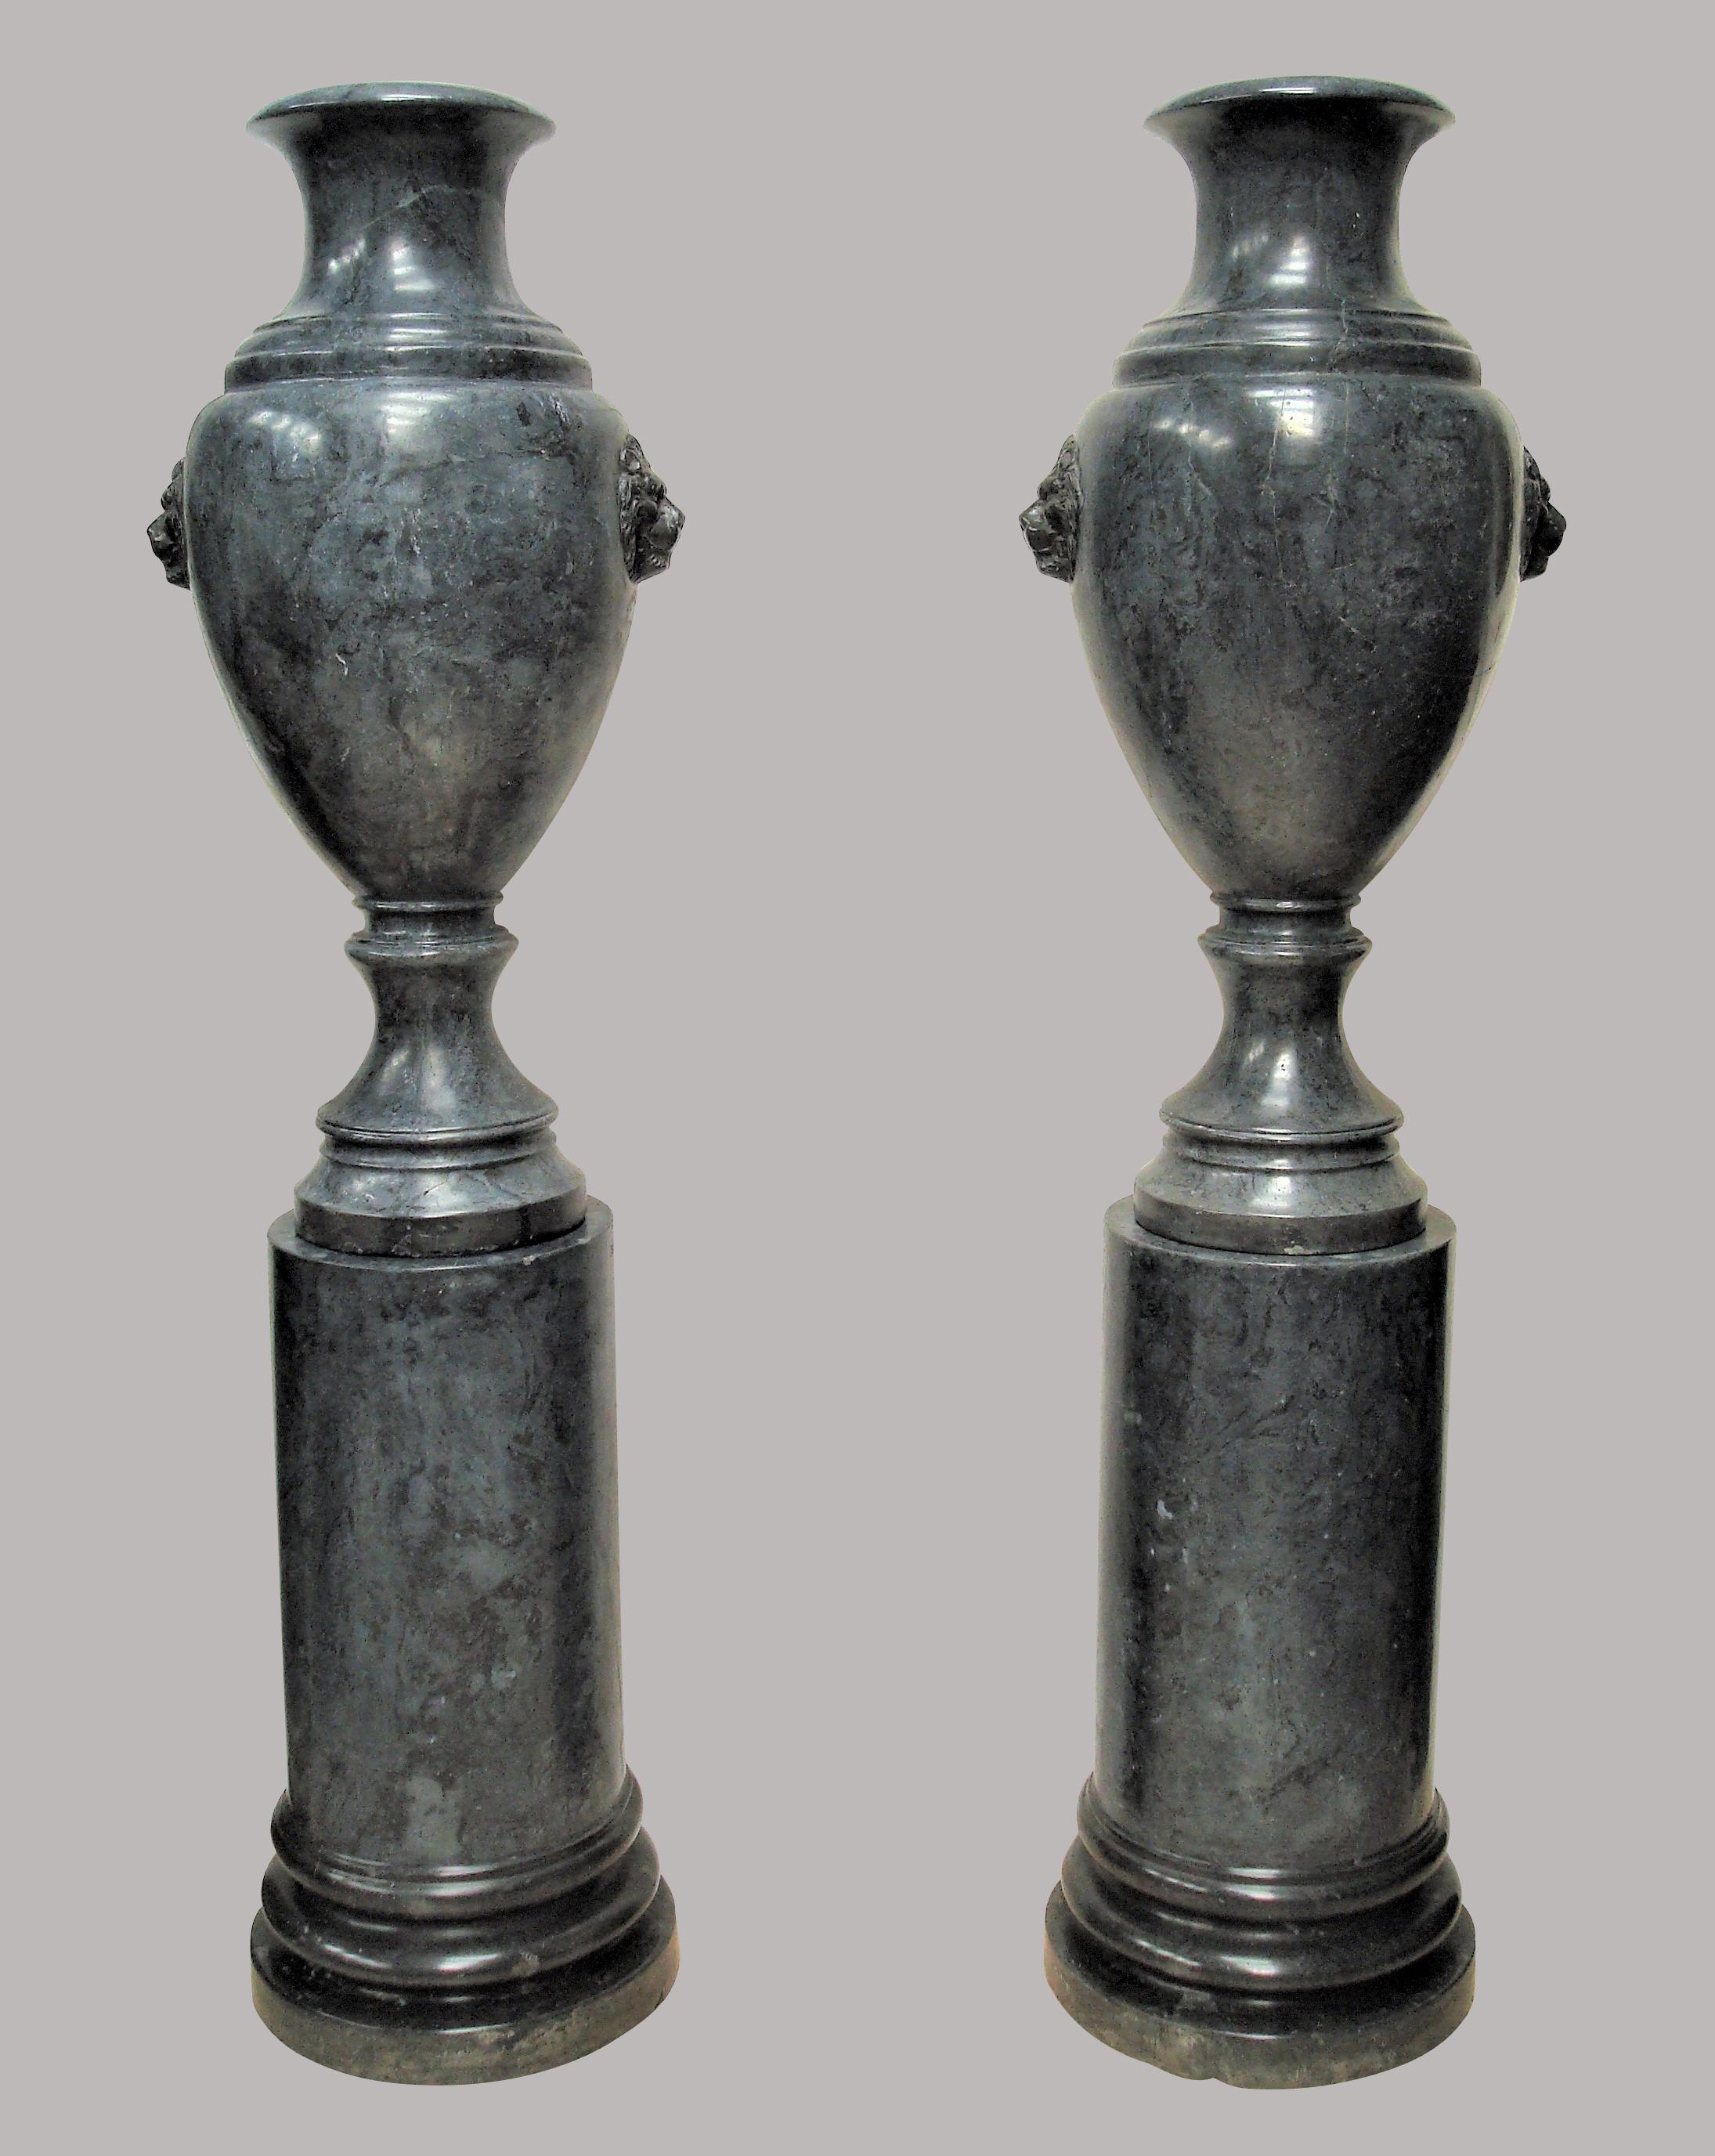 An imposing early 20th century pair of Scagliola urns on pedestals of monumental proportions, of steel blue color. The neoclassical style urns of Amphora shape with large black lion masks to either side. Standing on circular column pedestals with